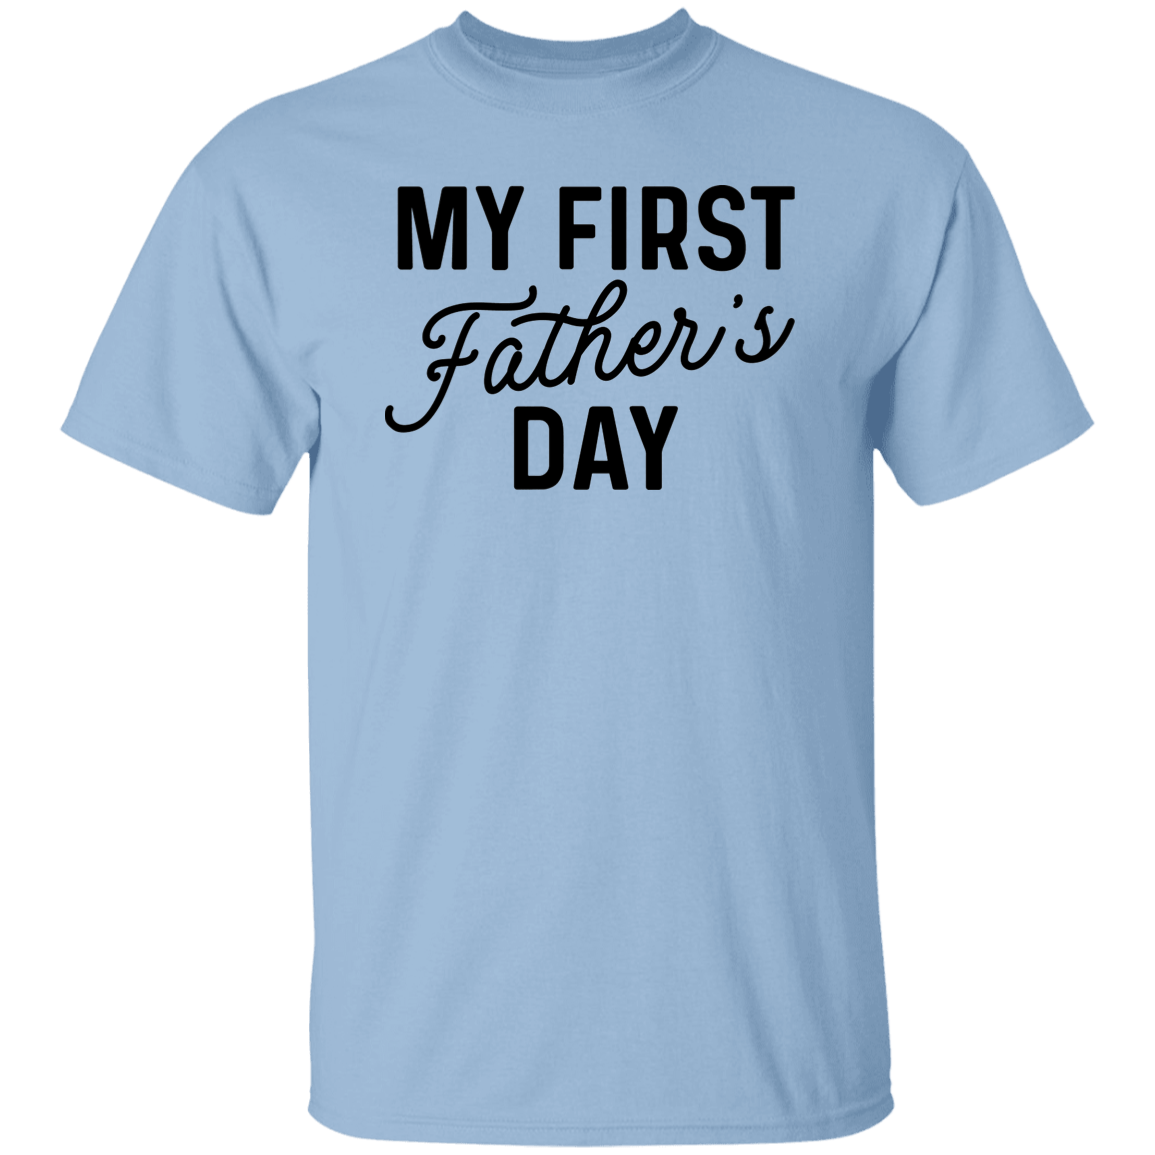 My First Father's Day T-Shirt